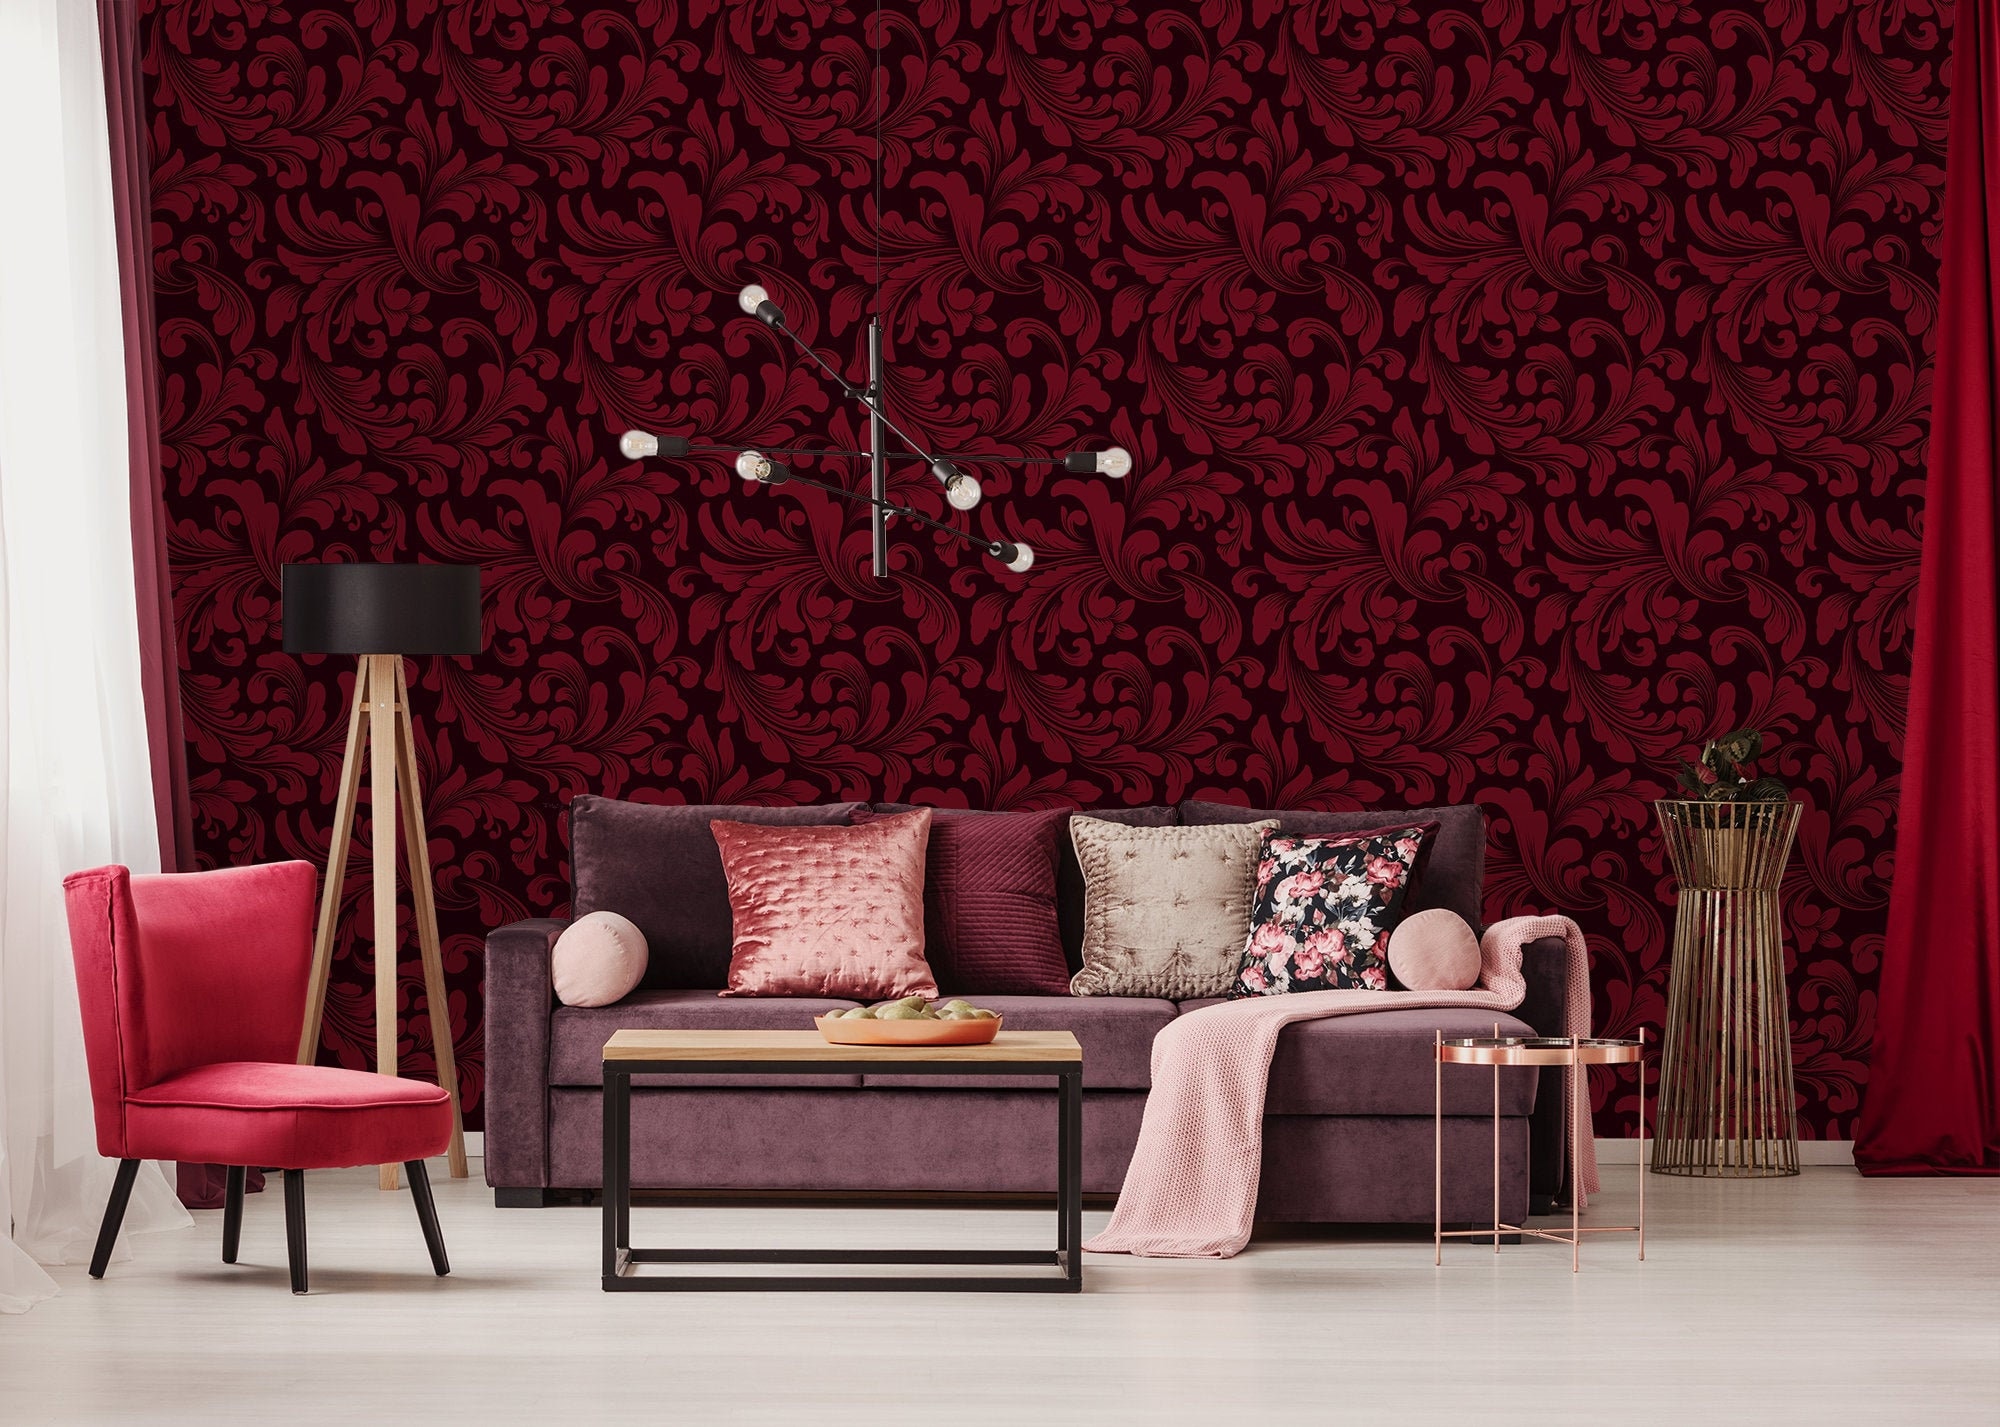 Luxury Damask Vinyl Striped Wallpaper Red Floral PVC Wall Paper Roll  Waterproof American Wall Cover Living room Bedroom Decor